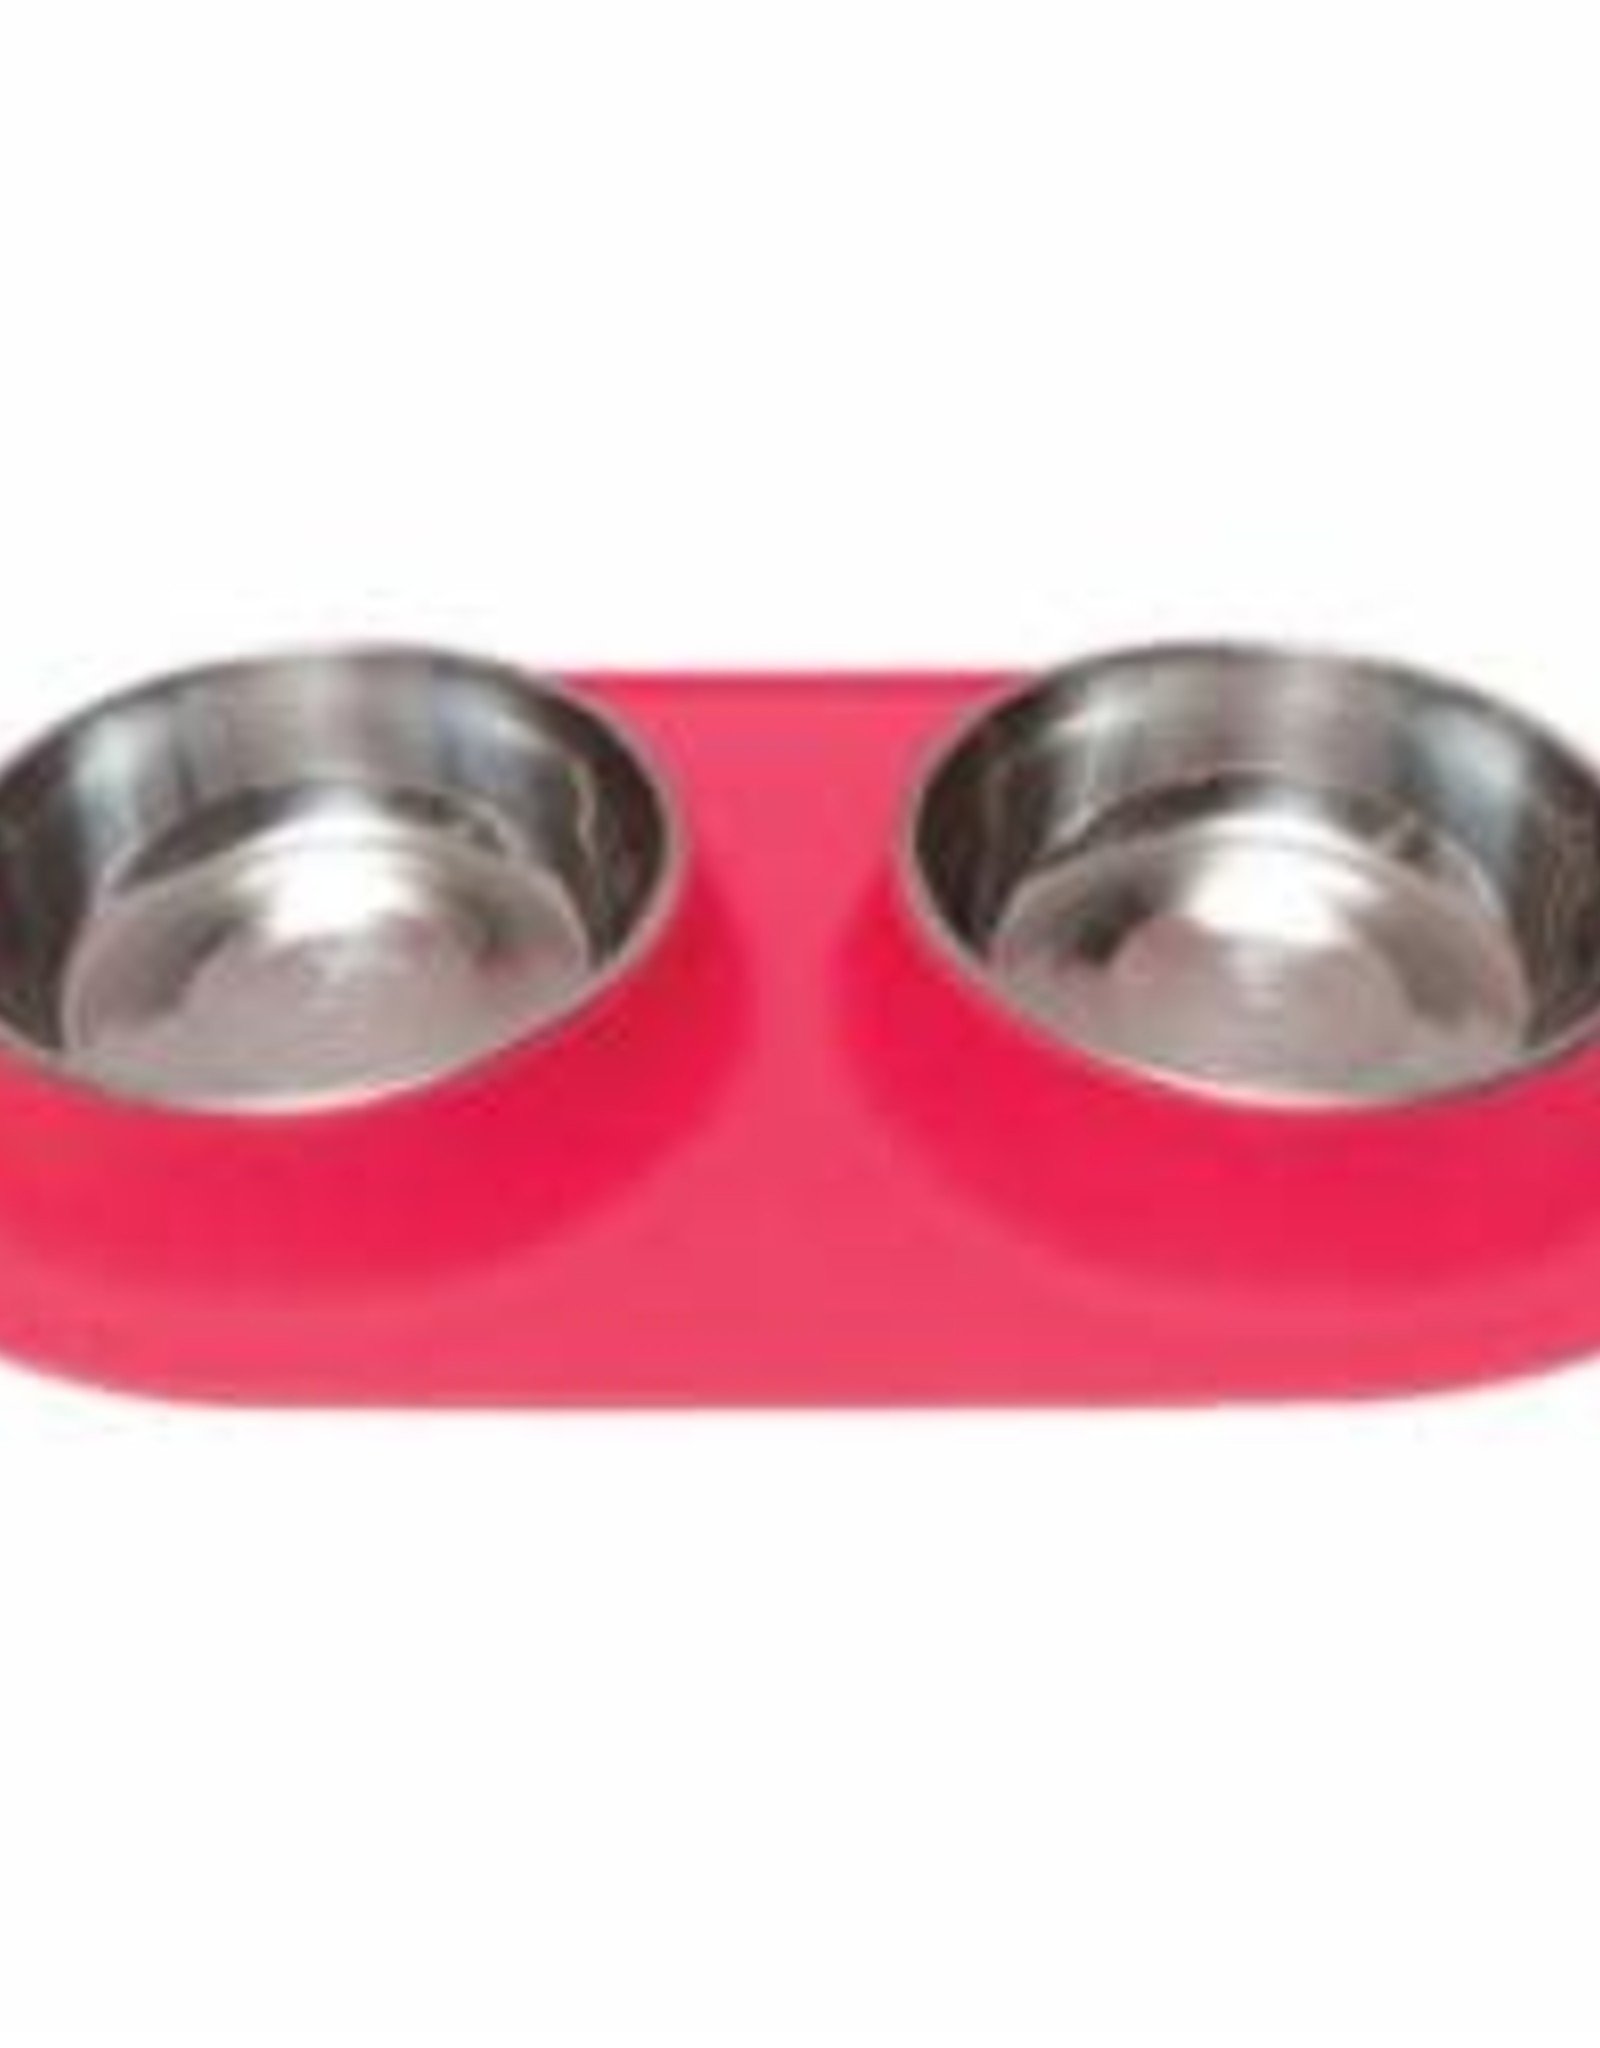 Messy Mutts Messy Mutts Feeder Silicone with SS Bowls Double Diner Medium Melon 1.5 Cup